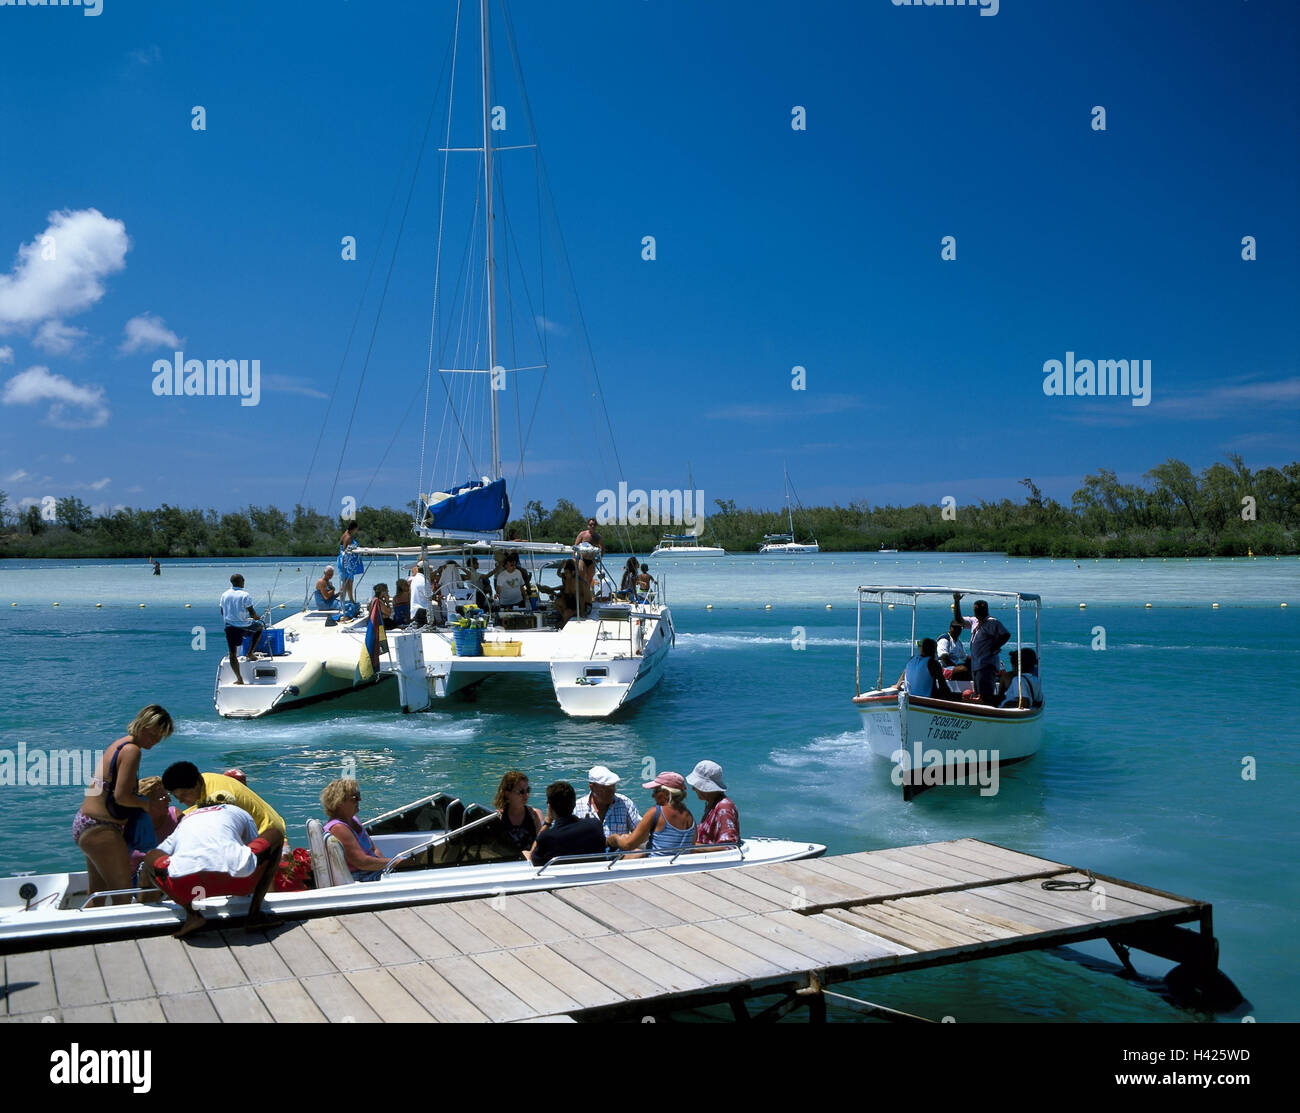 Mauritius, Ile aux Cerfs, sea, bridge, excursion boats, tourists, Indian ocean, Maskarenen, island state, island, the east, jetty, boots, tourism, vacation, leisure time, excursion, leisure time offer, leisure time possibilities, boat trip Stock Photo